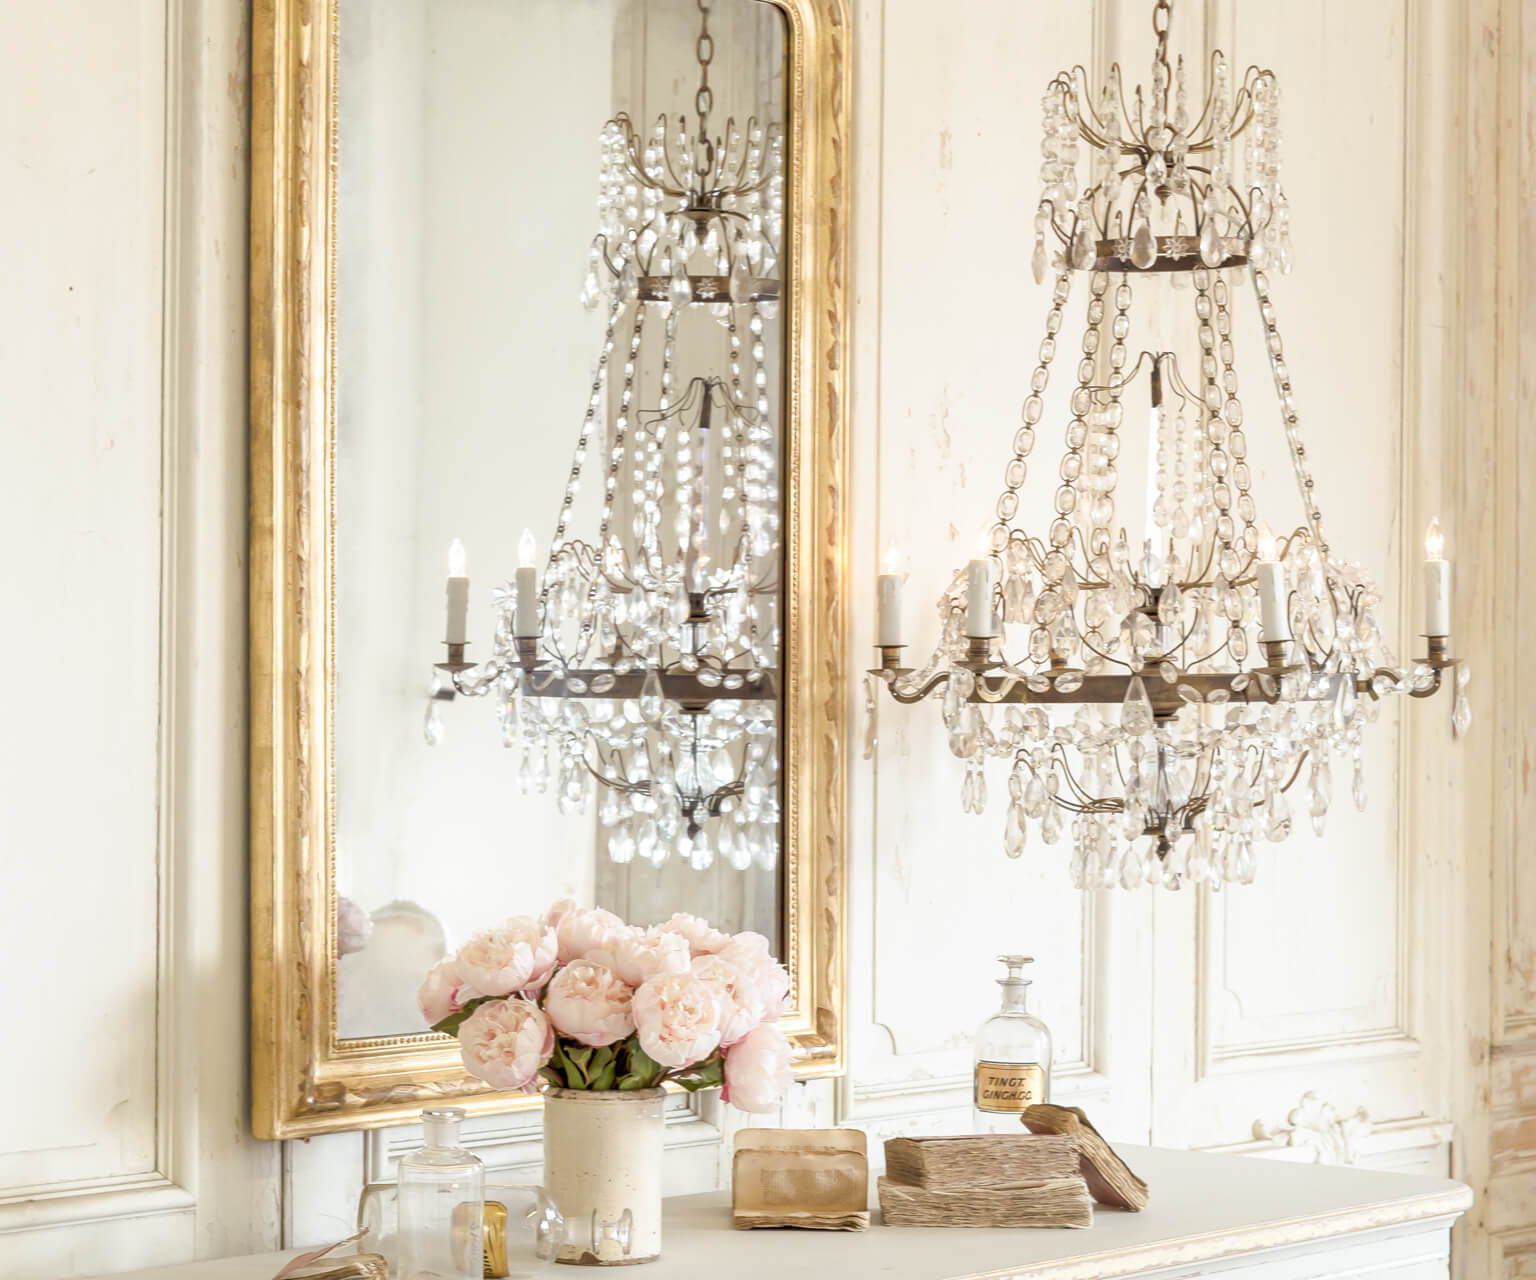 Eloquence® Albertina Chandelier in Burnished Iron